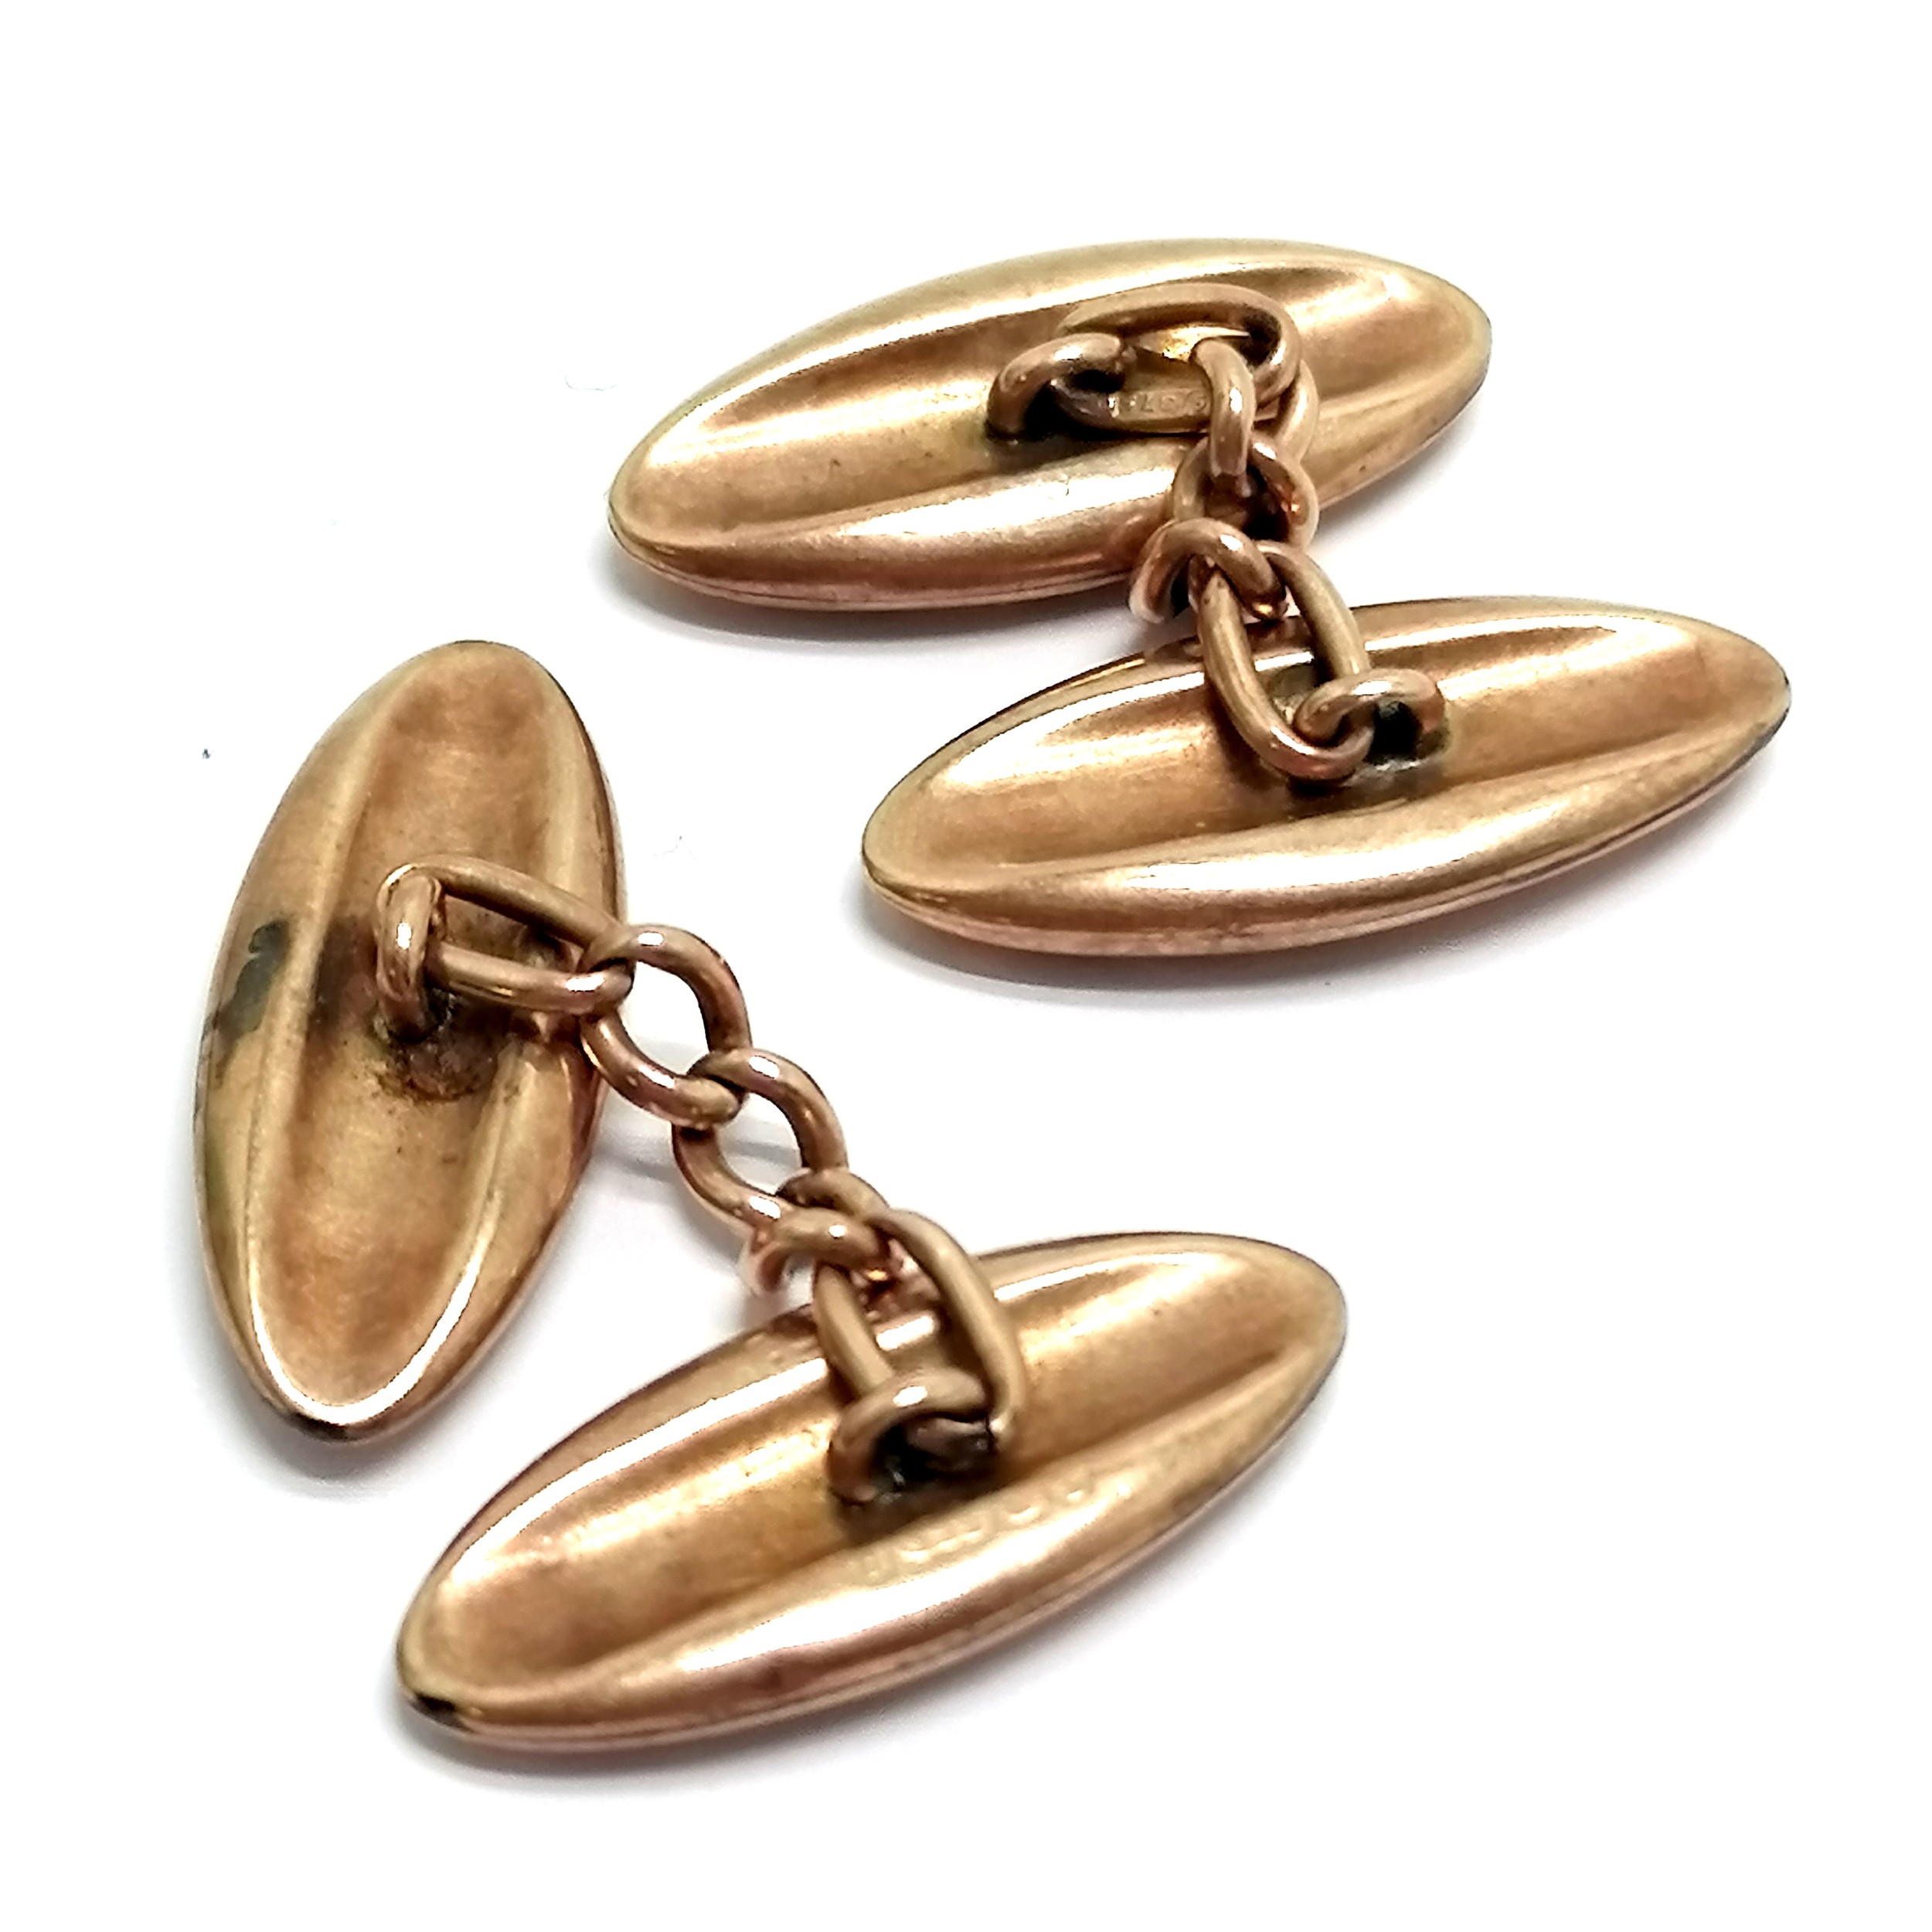 Antique pair of 9ct hallmarked rose gold cufflinks with engraved detail - 4.2g with slight dents - Image 2 of 2